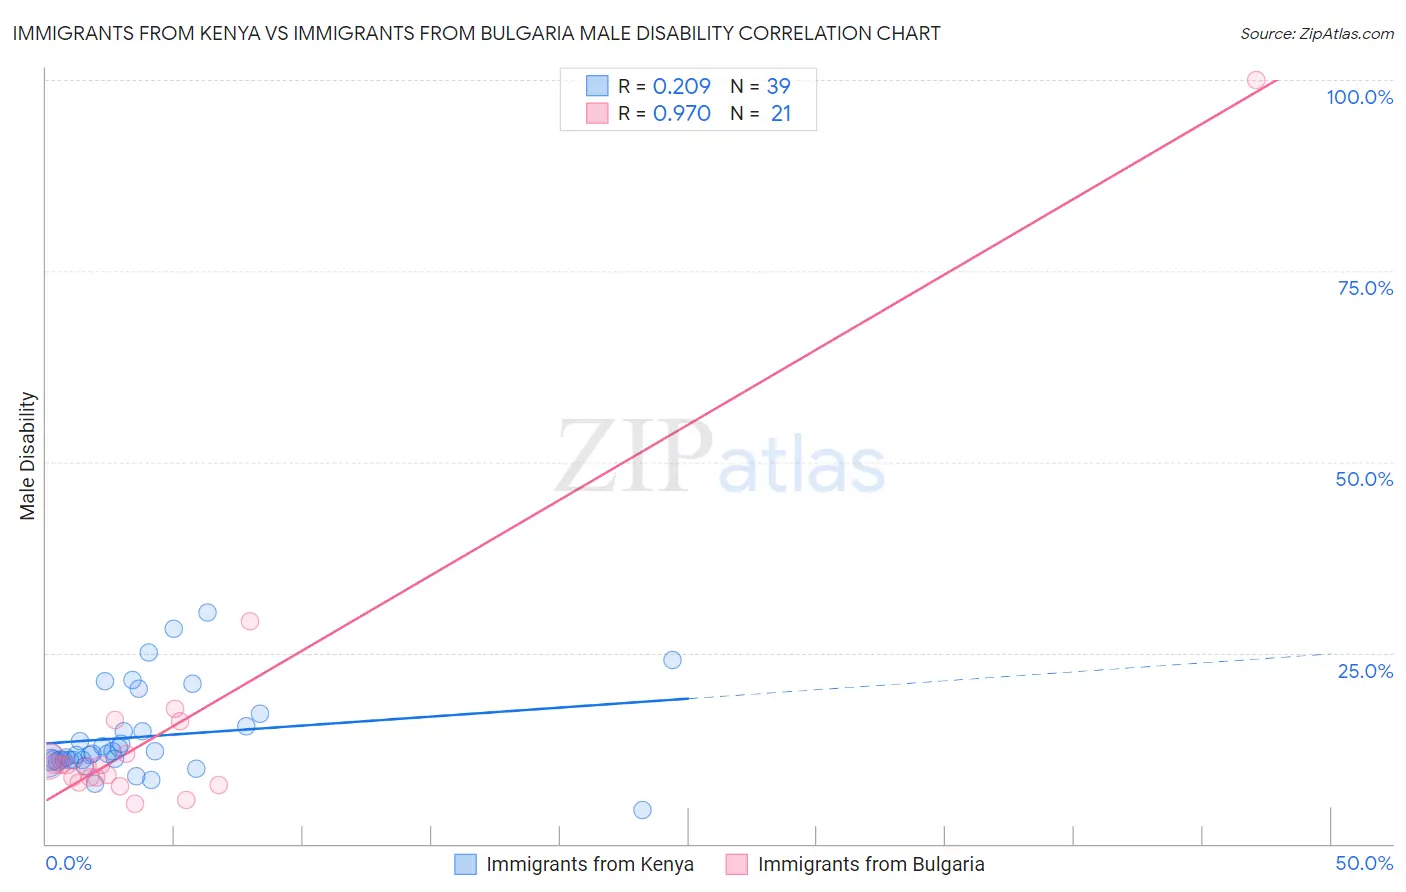 Immigrants from Kenya vs Immigrants from Bulgaria Male Disability